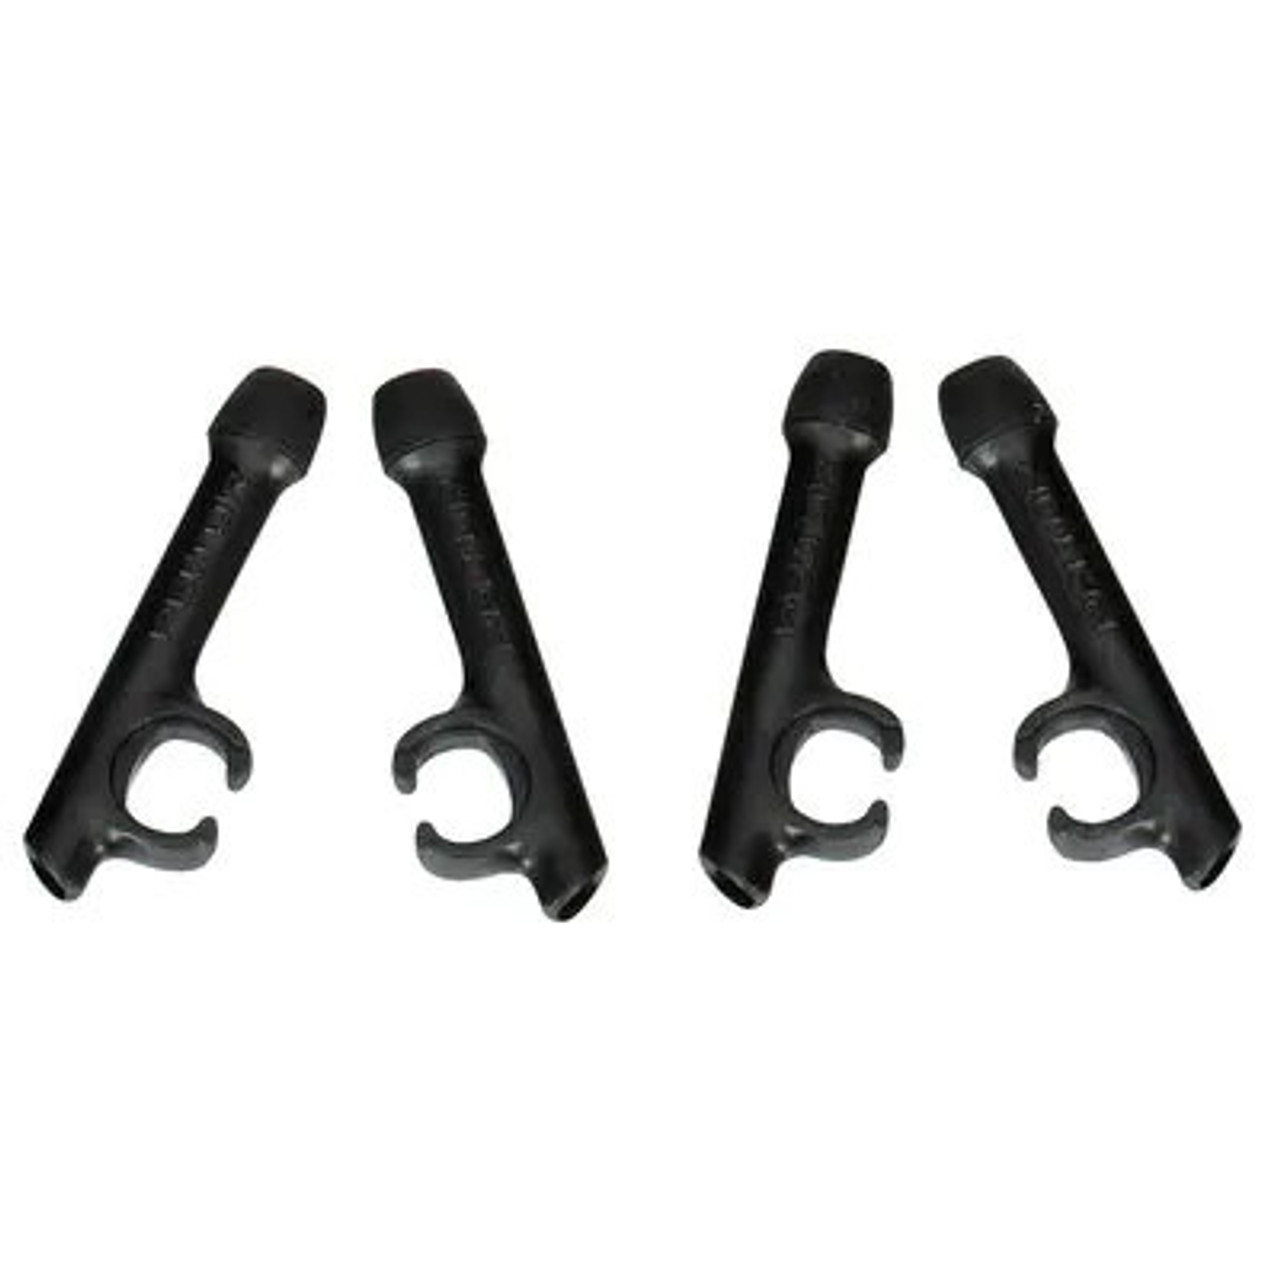 3M PELTOR Guide Arms W/ Sleeves A46/4 - Set of 4/EA Jendco Safety Supply